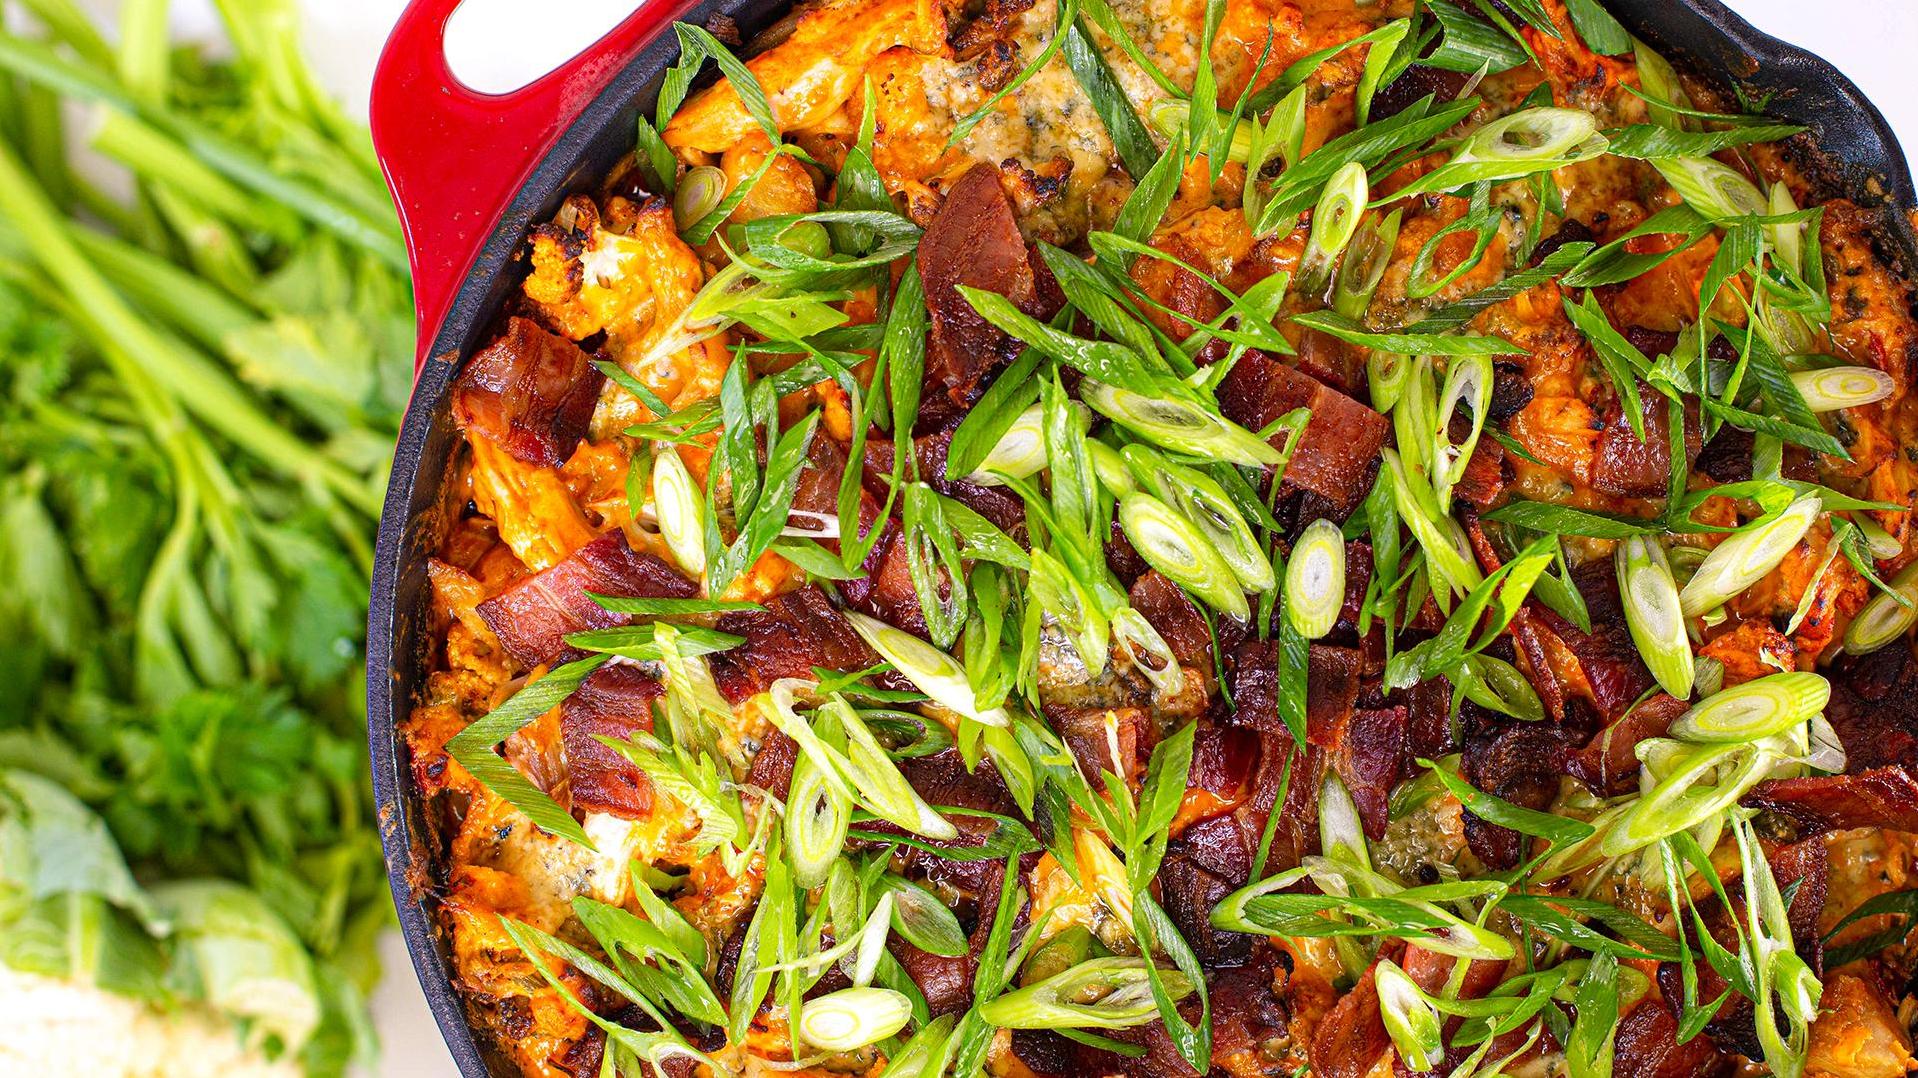  Trust me, you won't even miss the gluten! This buffalo chicken casserole is a must-try!